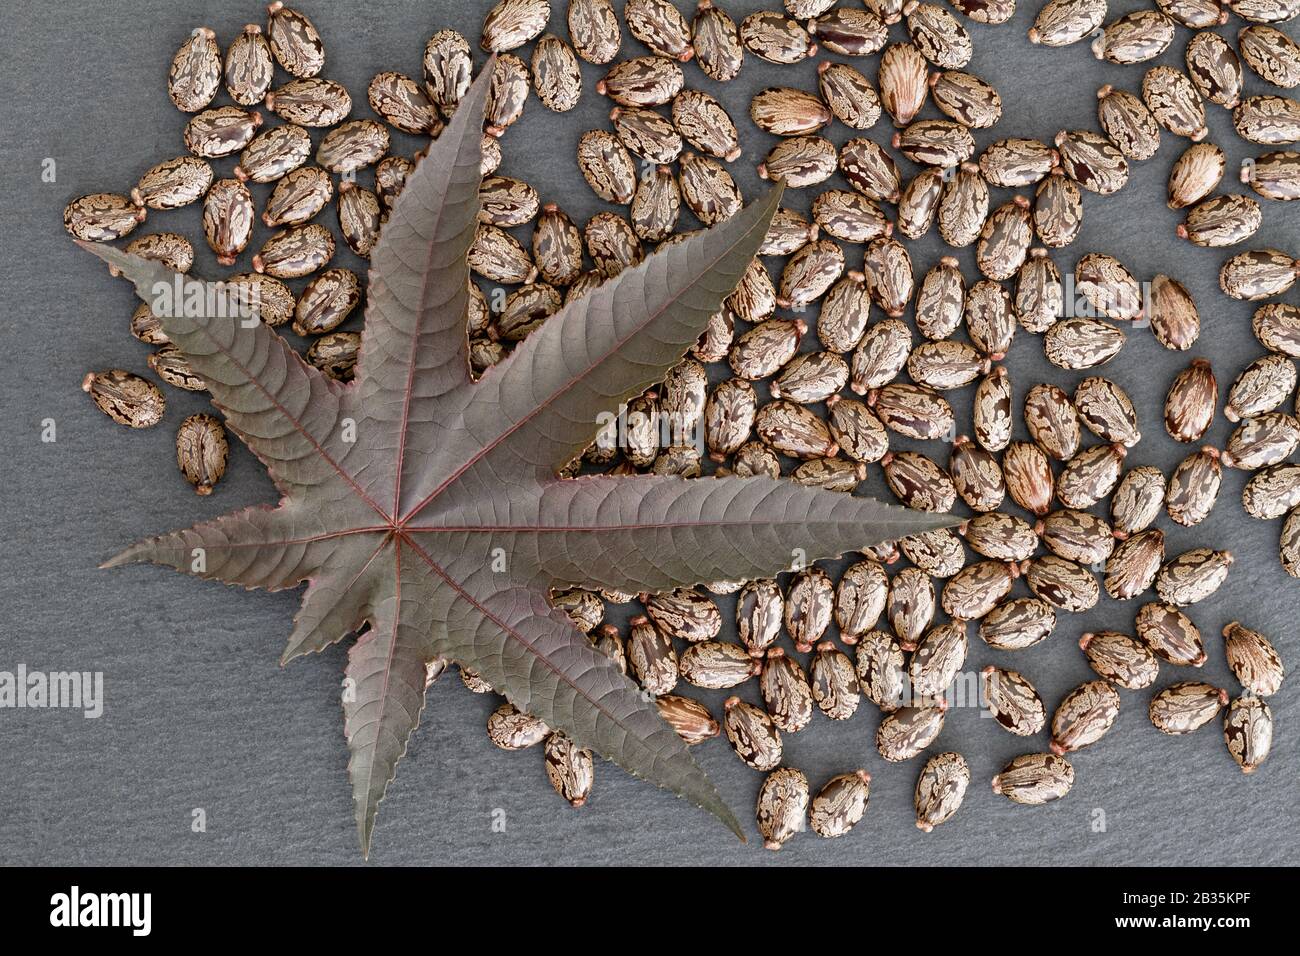 Castor Bean (Ricinus communis) - Leaf and Seeds: nature concept with a leaf and serveral seeds of castor bean (ricinus communis) on slate board Stock Photo